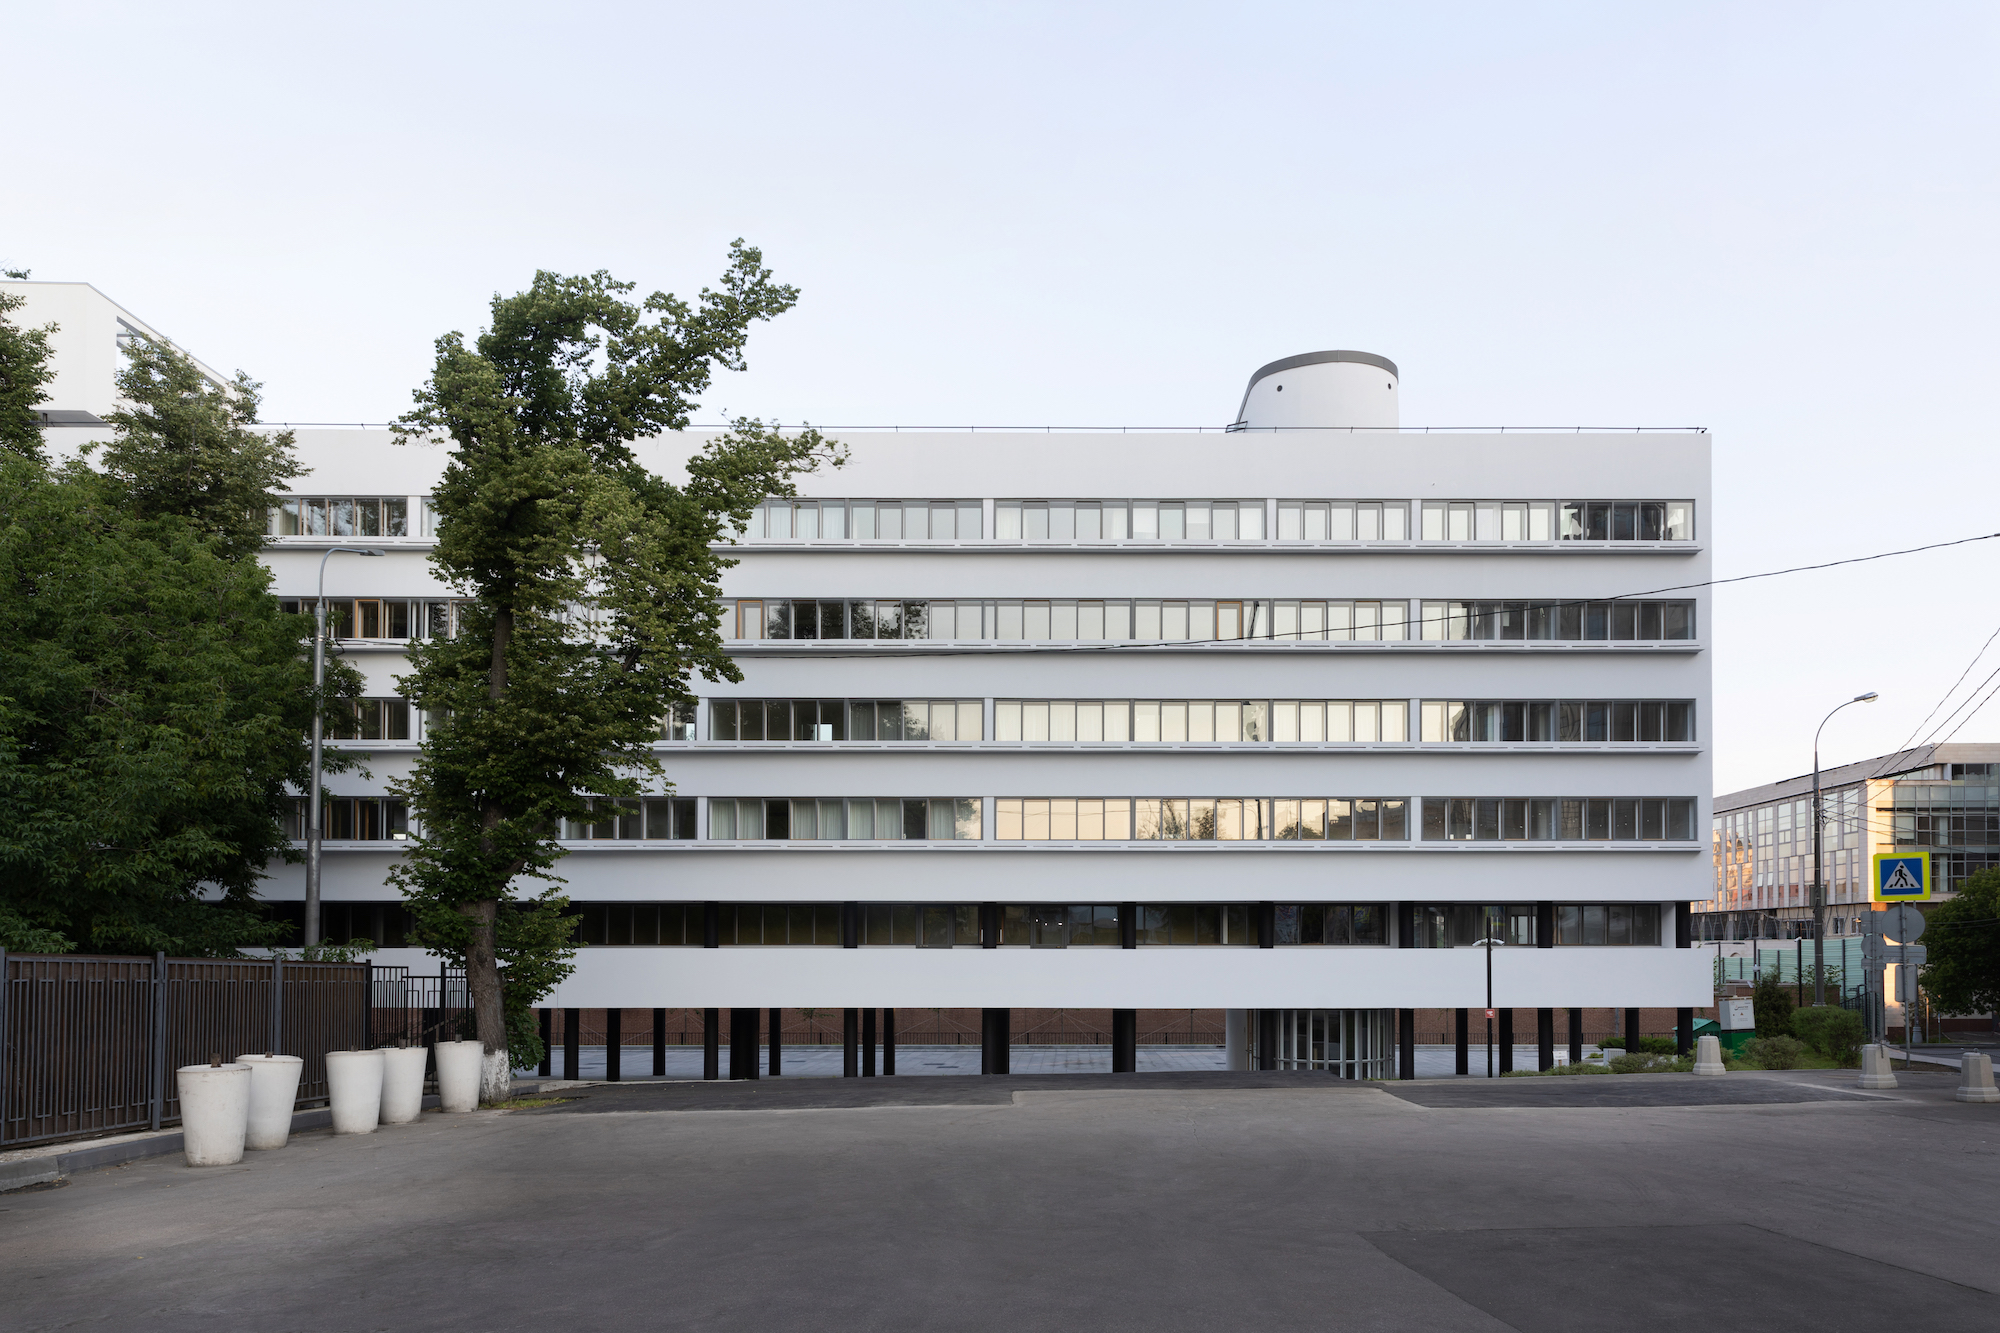 Saving Narkomfin: the modernist building at the heart of the Soviet Union’s 1930s culture wars